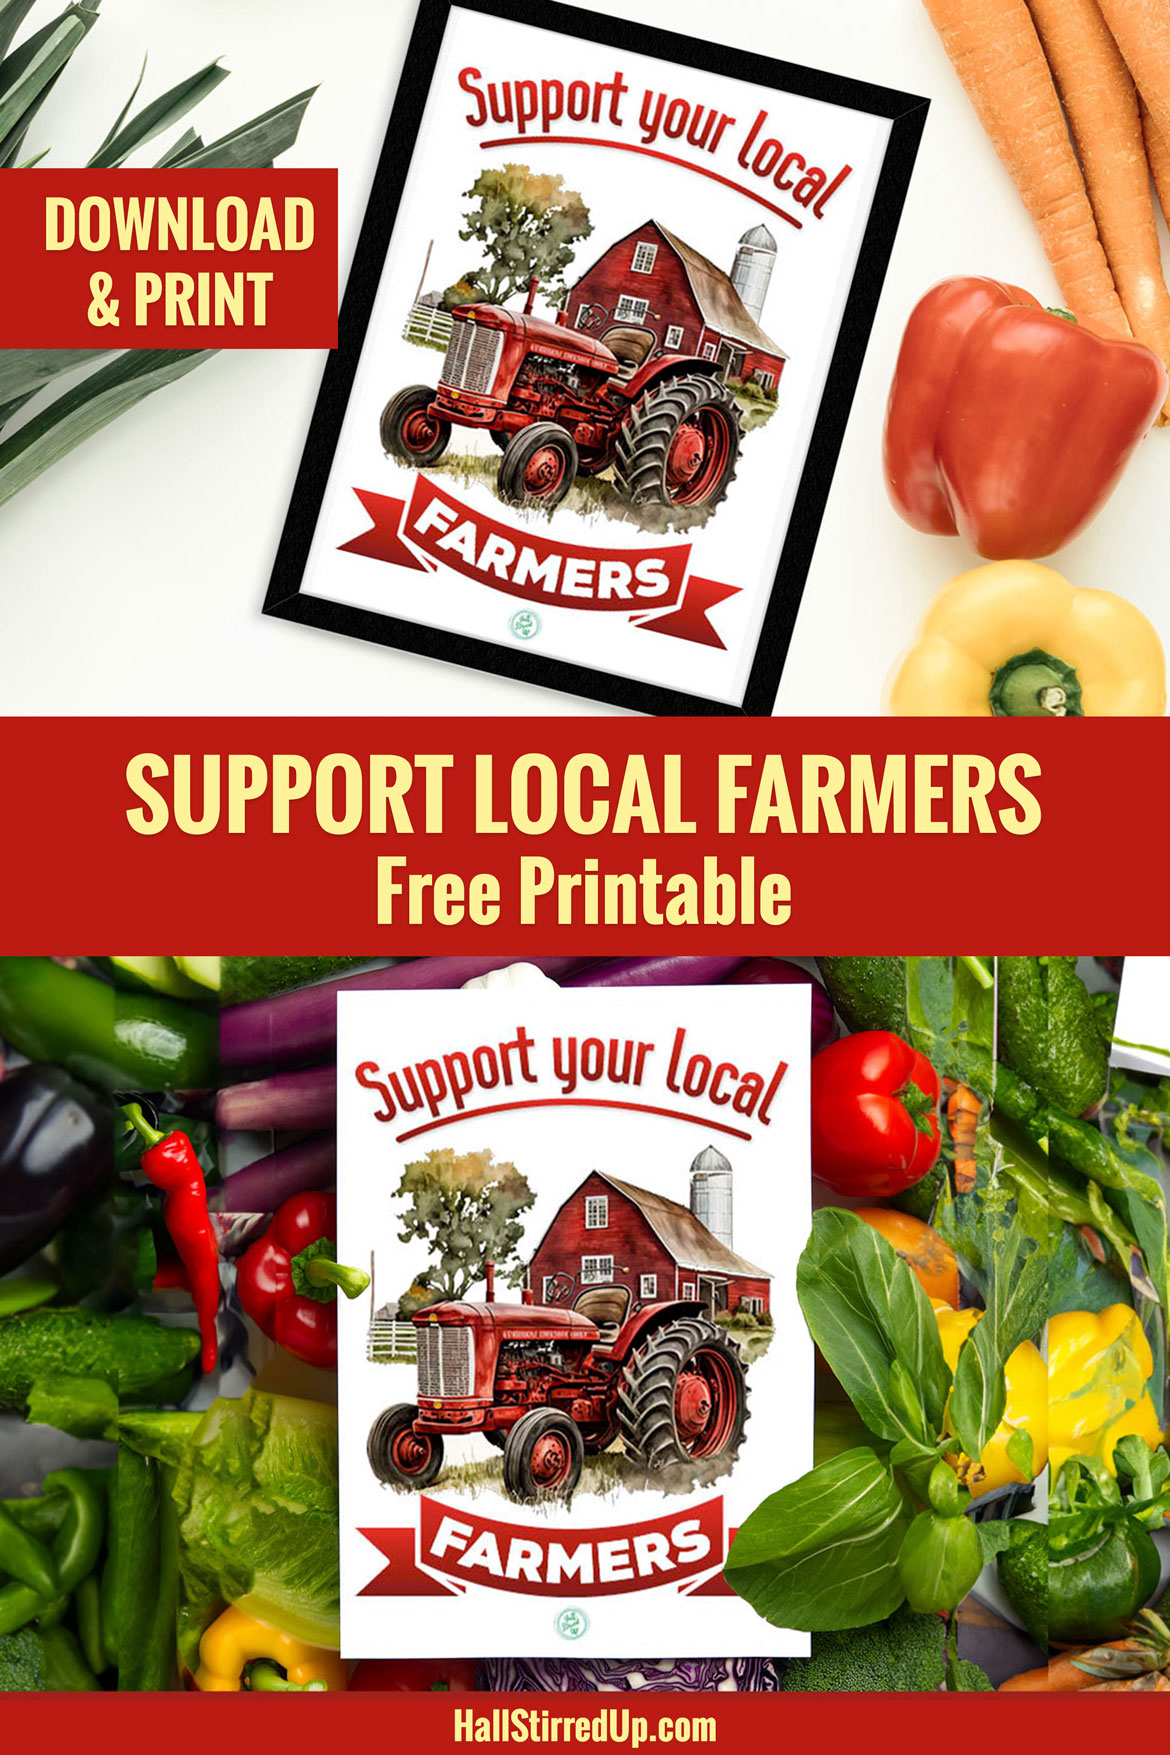 Support your local farmers Includes free printable